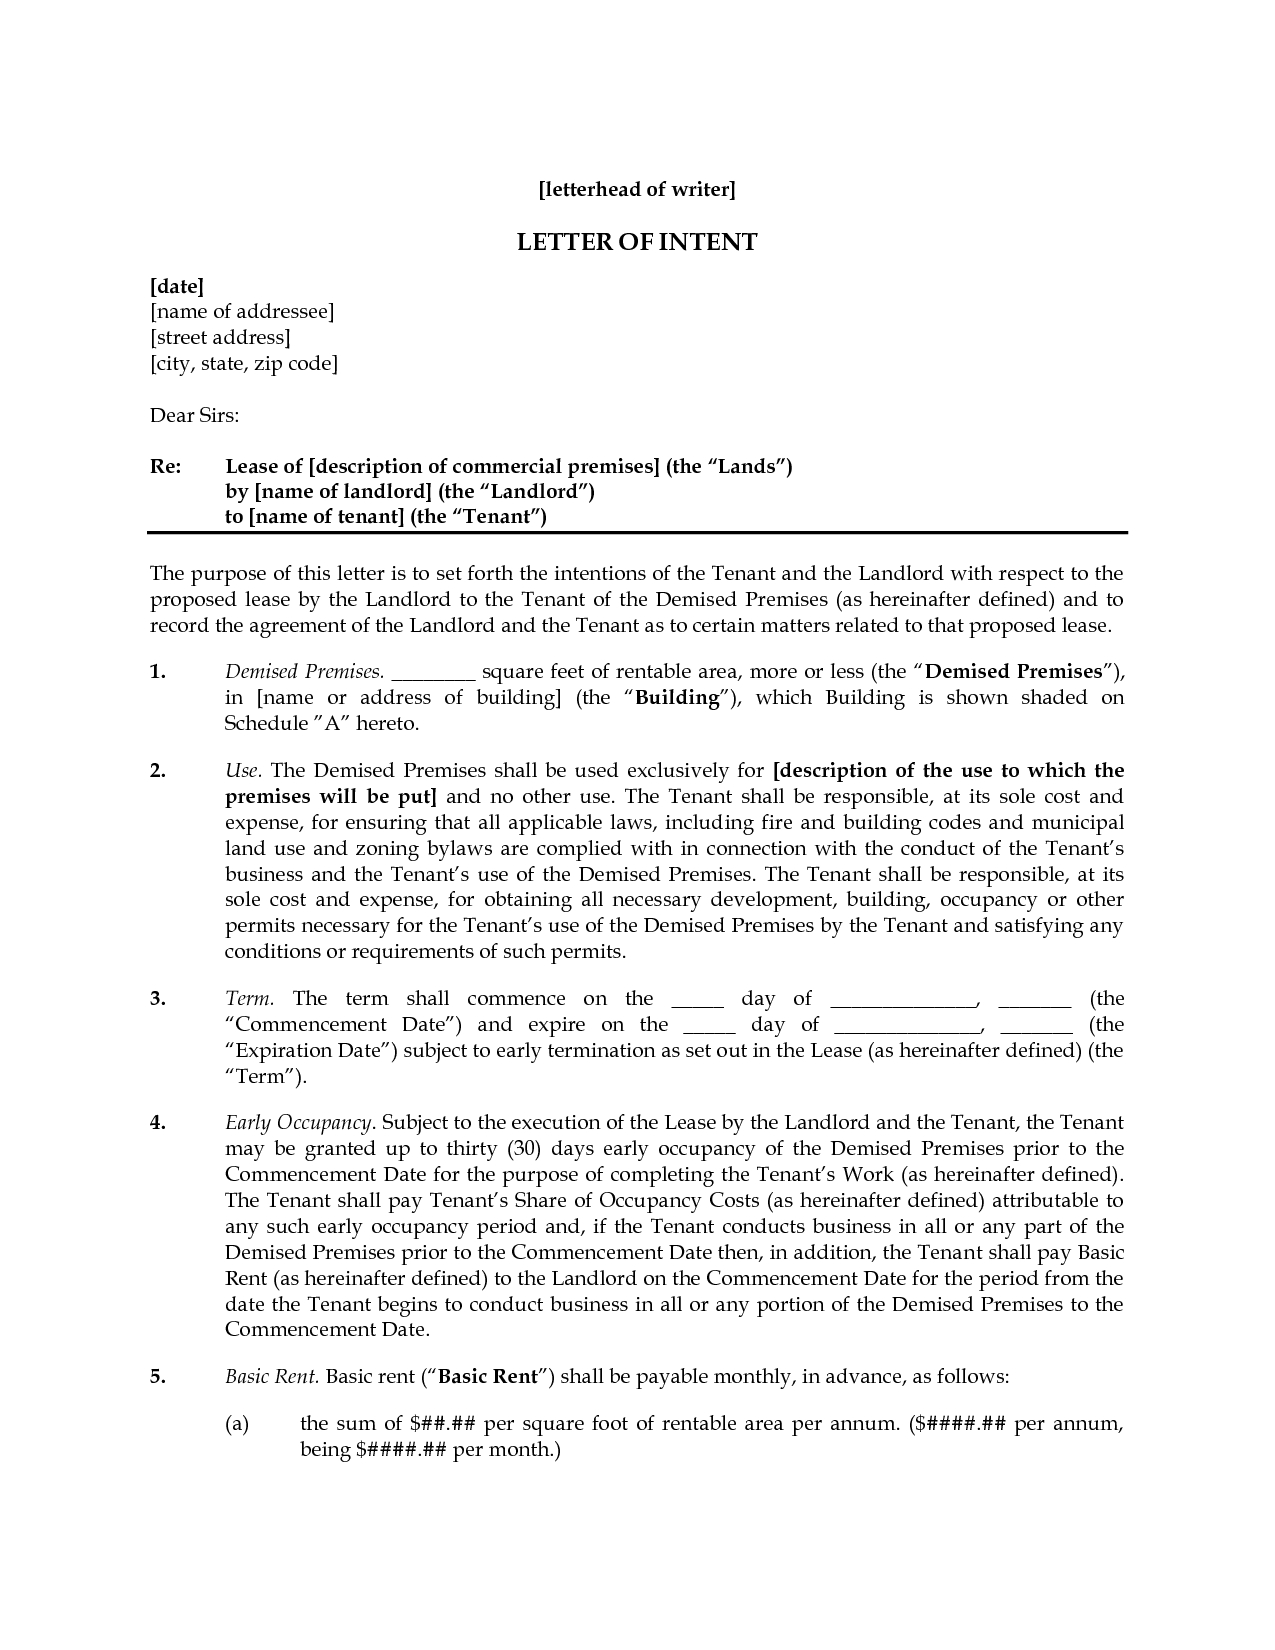 Free Letter Of Intent to Lease Commercial Space Template - Letter Intent Real Estate Lease Mercial Image Ideas Sample to